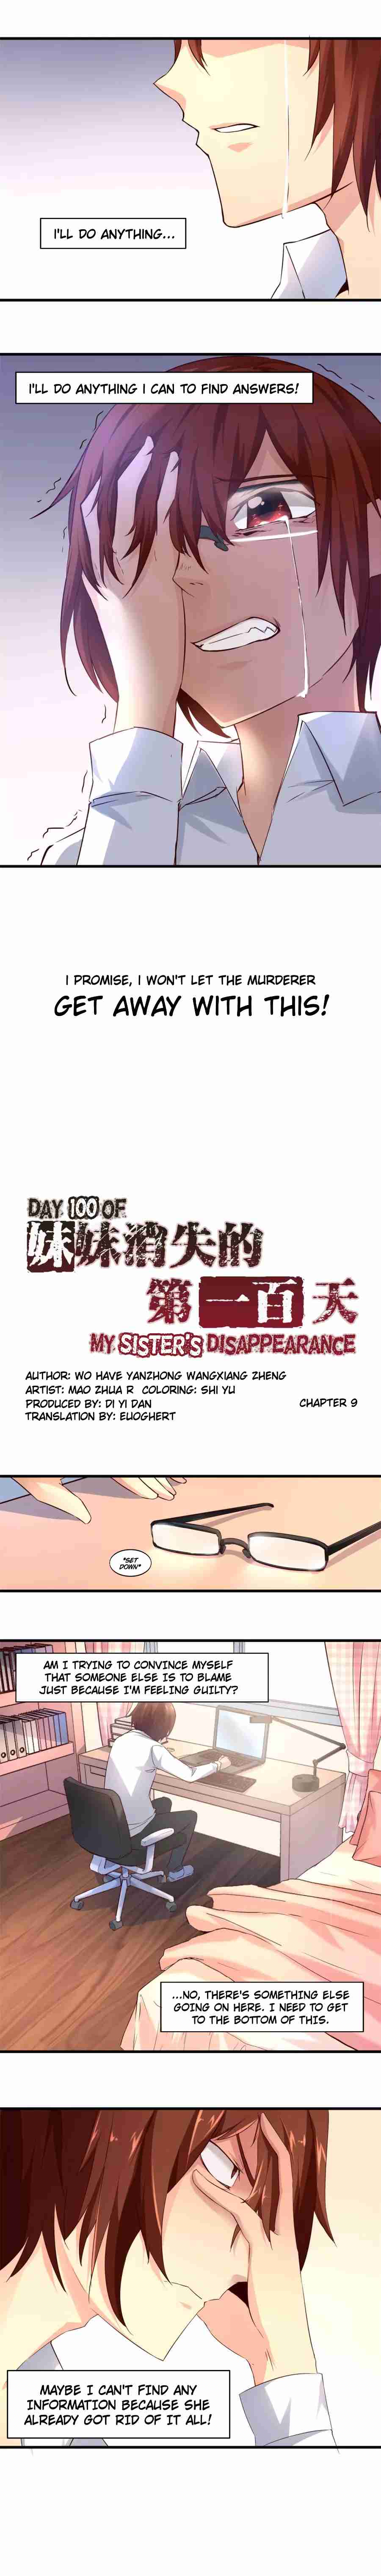 Day 100 of My Sister's Disappearance Ch. 9 The Truth (Part 2)